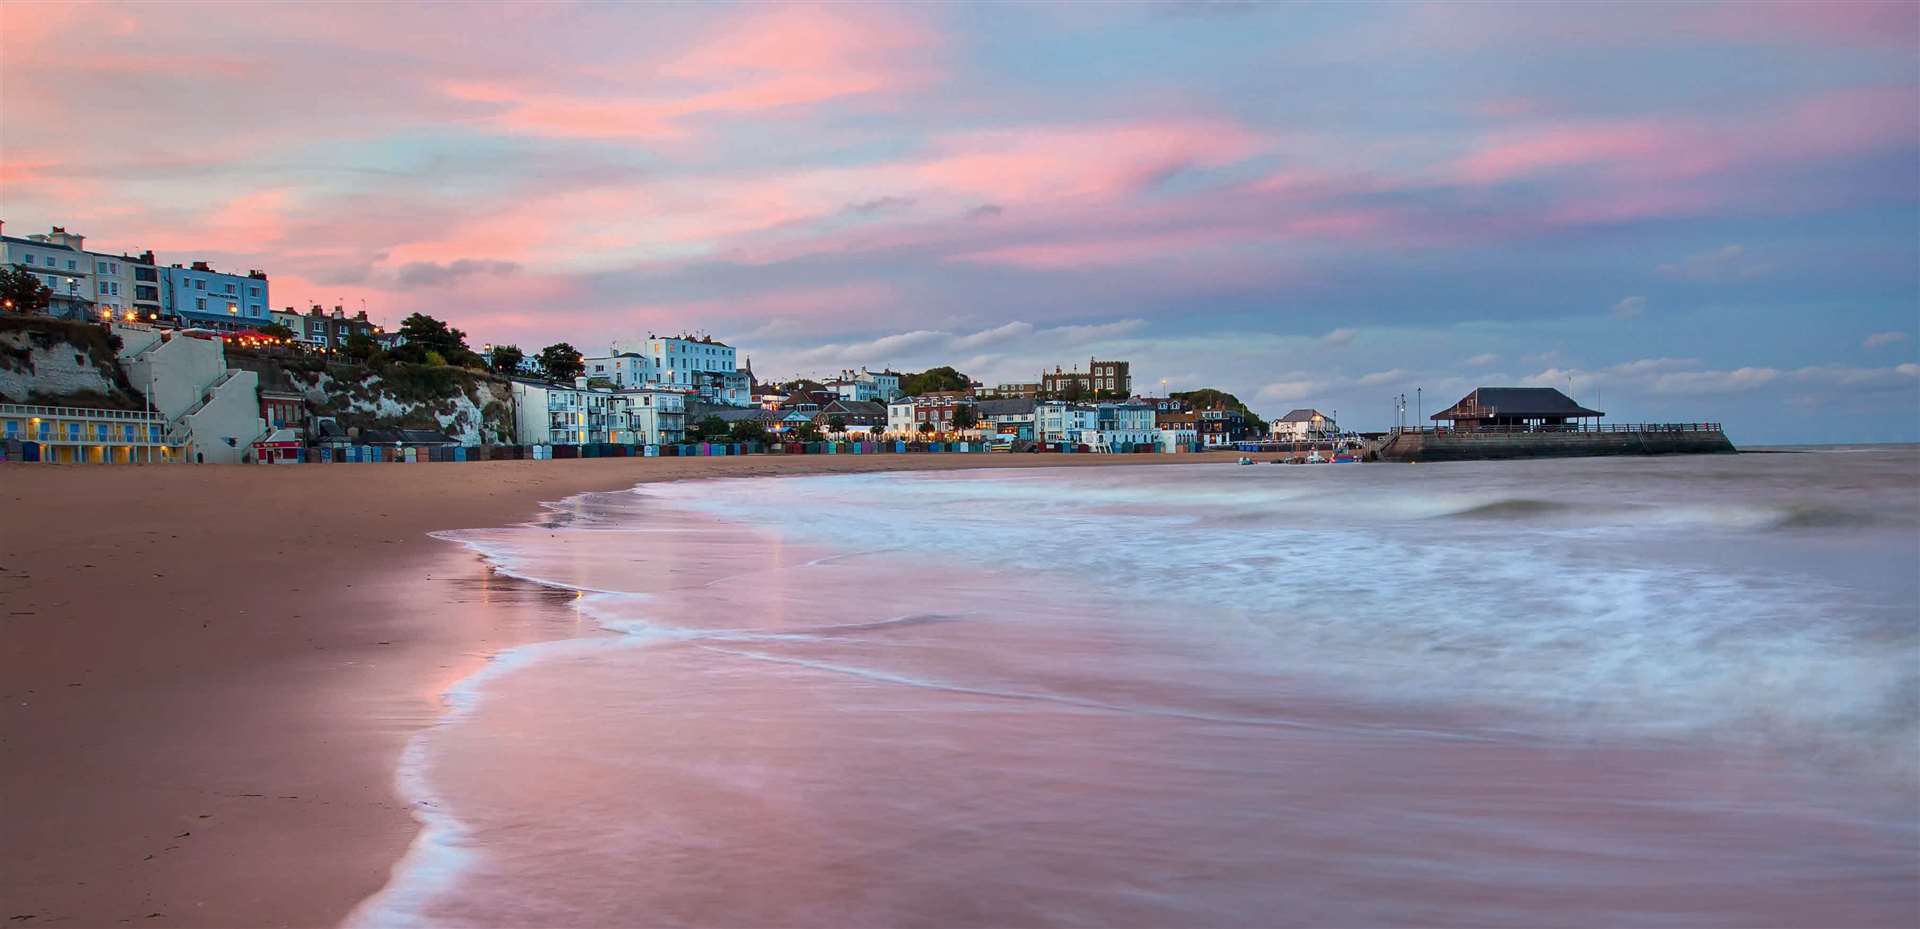 The beach in Broadstairs